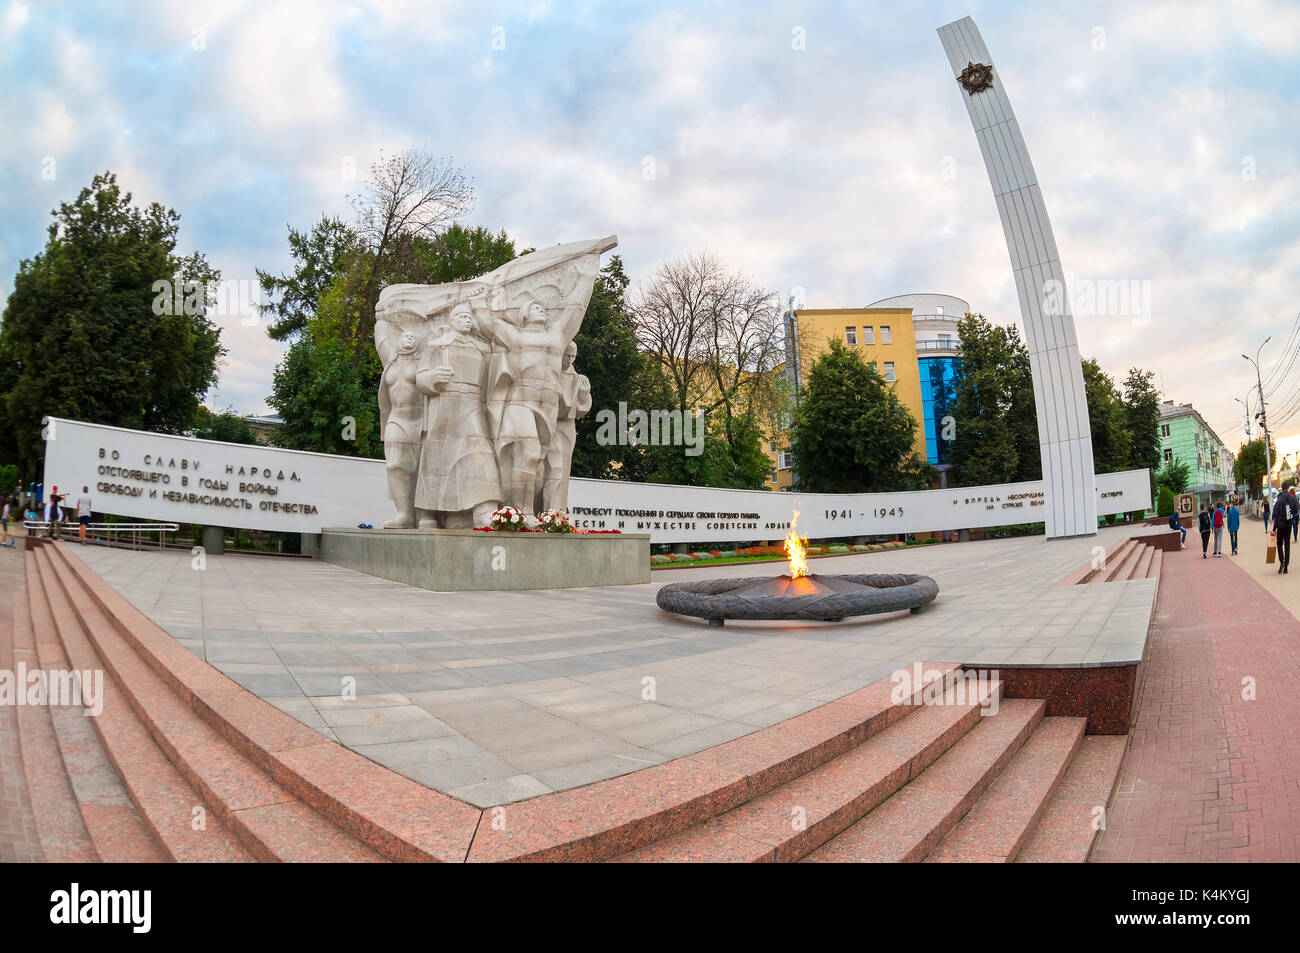 Ryazan, Russia - September 1, 2017: Eternal flame at the memory complex of the Victory in the Great Patriotic War in Ryazan, Russia Stock Photo